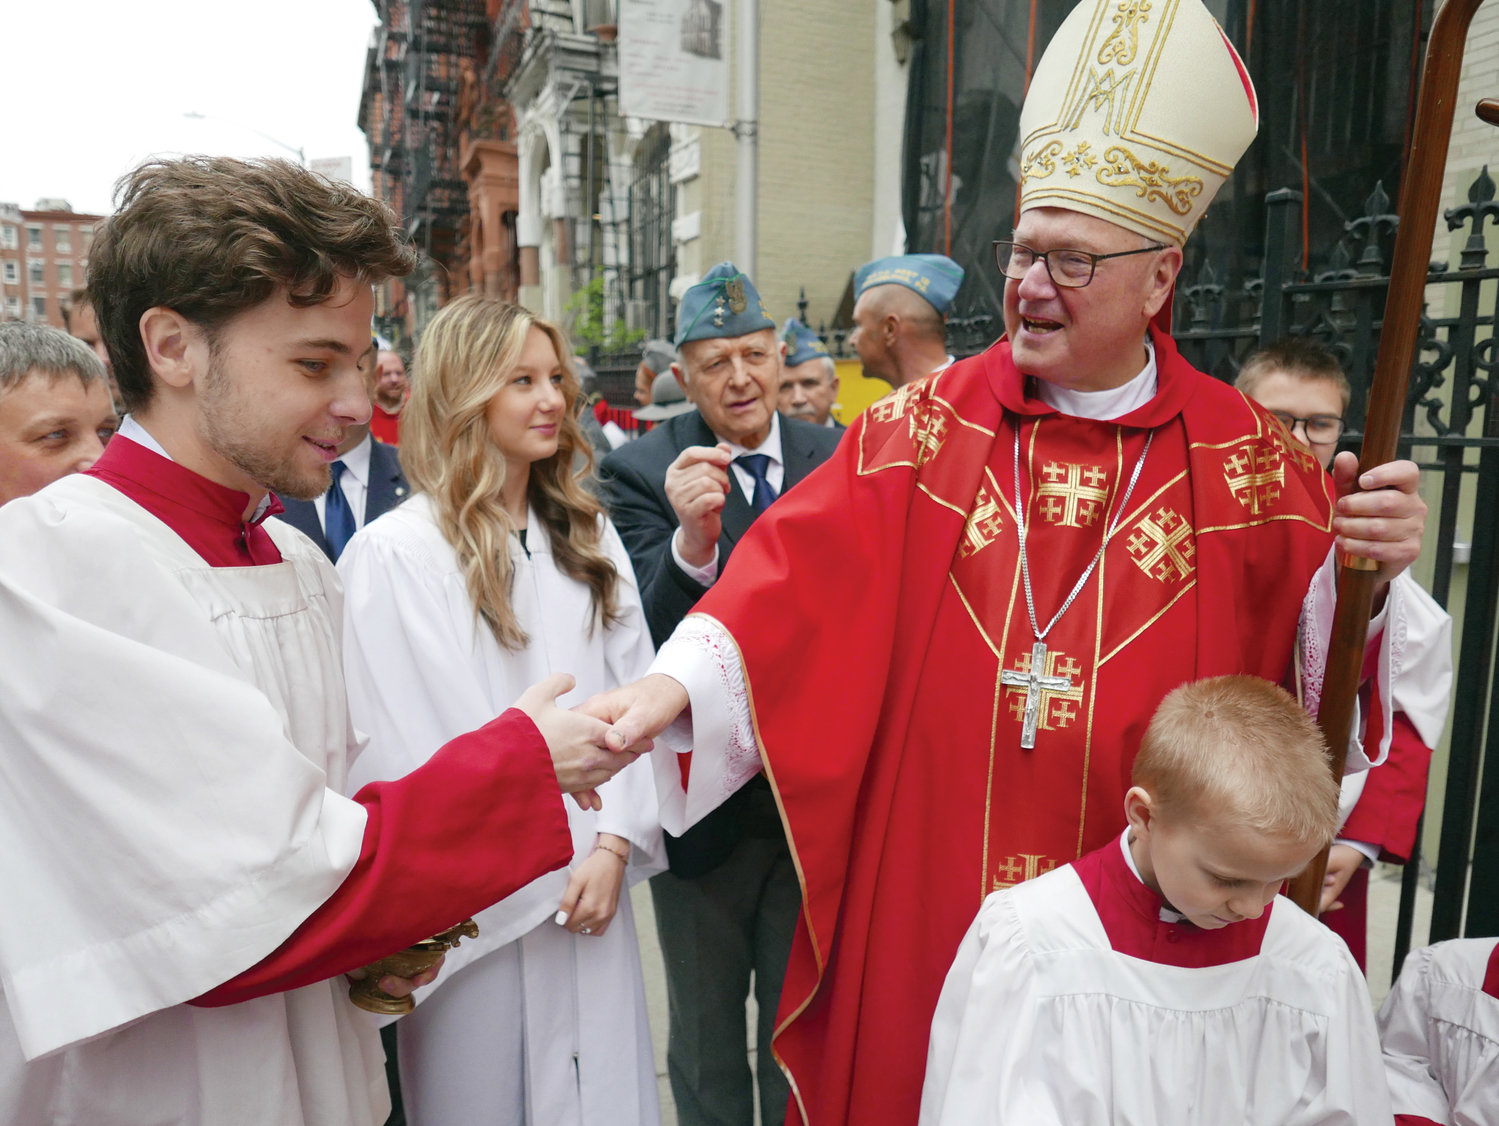 Cardinal Dolan greets the faithful outside St. Stanislaus Bishop and Martyr Church in Manhattan’s East Village before celebrating Mass for the parish’s 150th jubilee May 8.